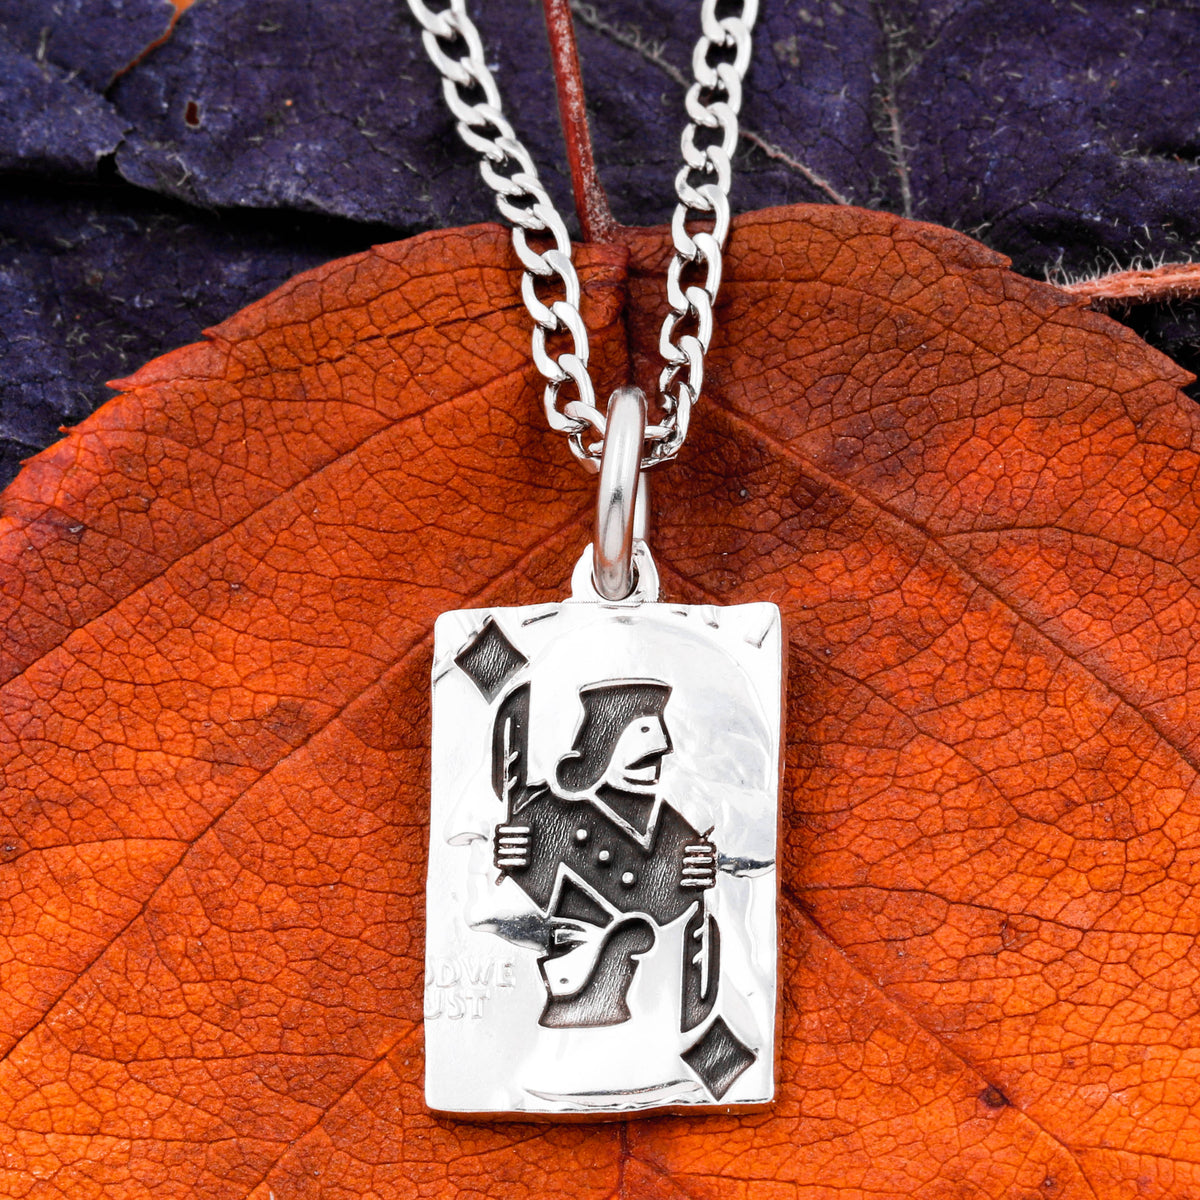 Sterling Silver Queen of Hearts Playing Card Charm Necklace with